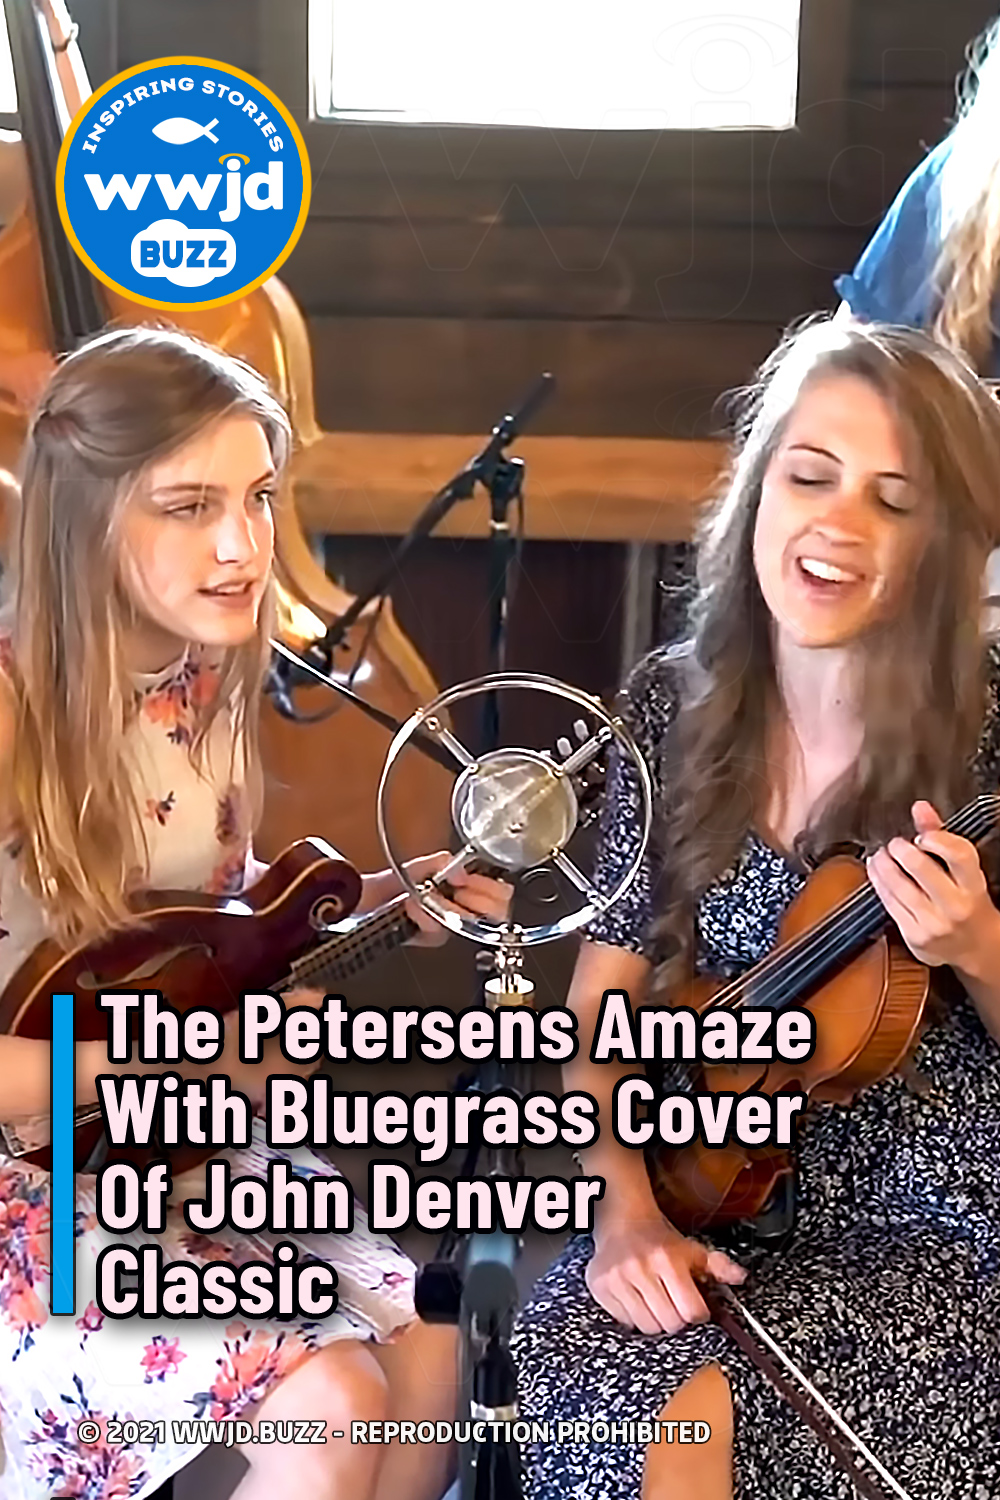 The Petersens Amaze With Bluegrass Cover Of John Denver Classic